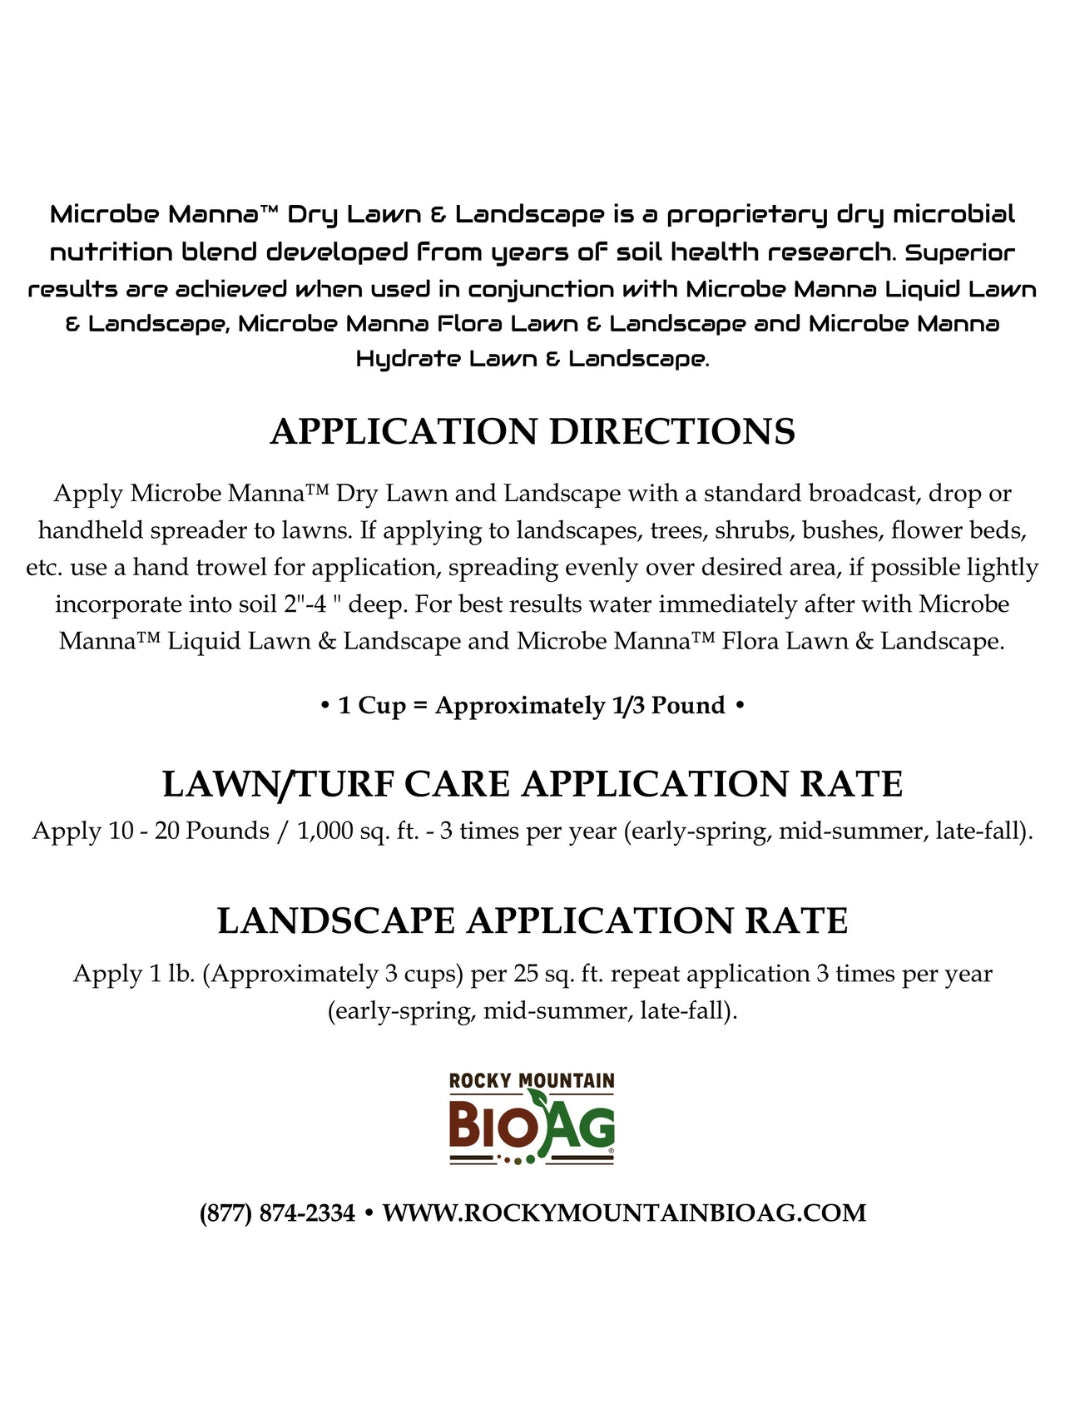 Microbe Manna Dry Lawn and Landscape microbial food back Rocky Mountain BioAg®